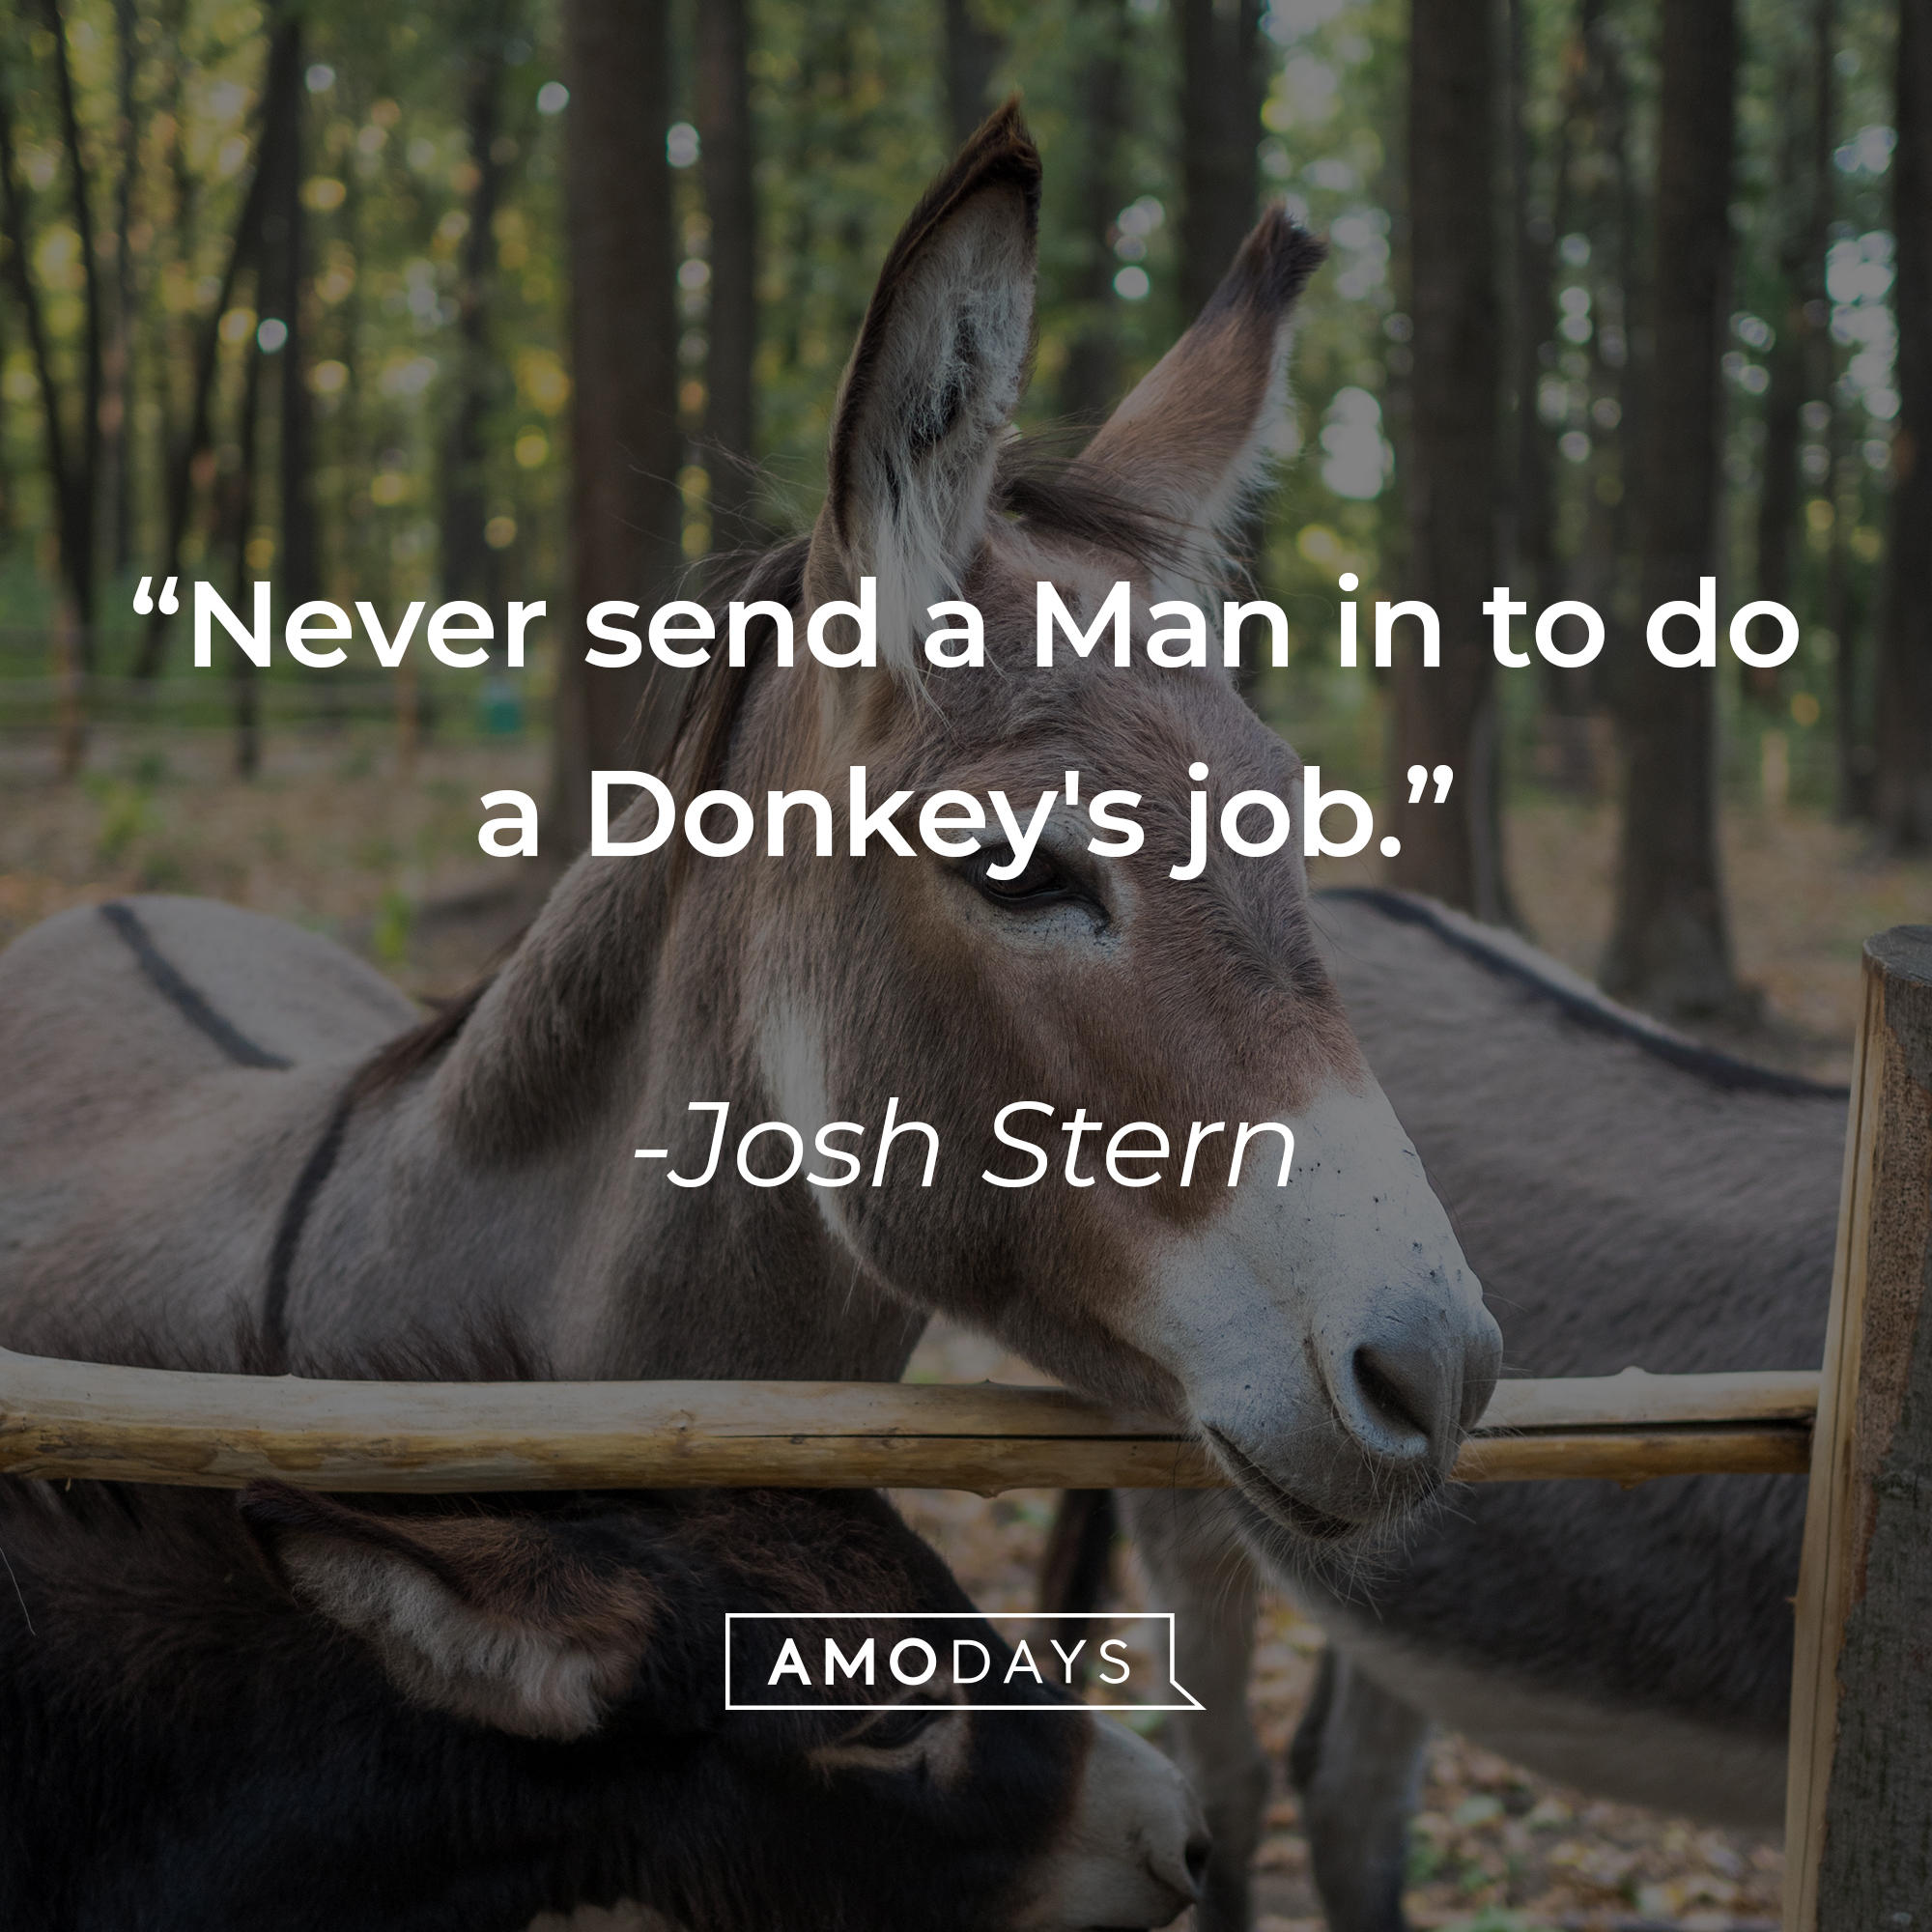 Josh Stern's quote: "Never send a Man in to do a Donkey's job." | Source: Unsplash